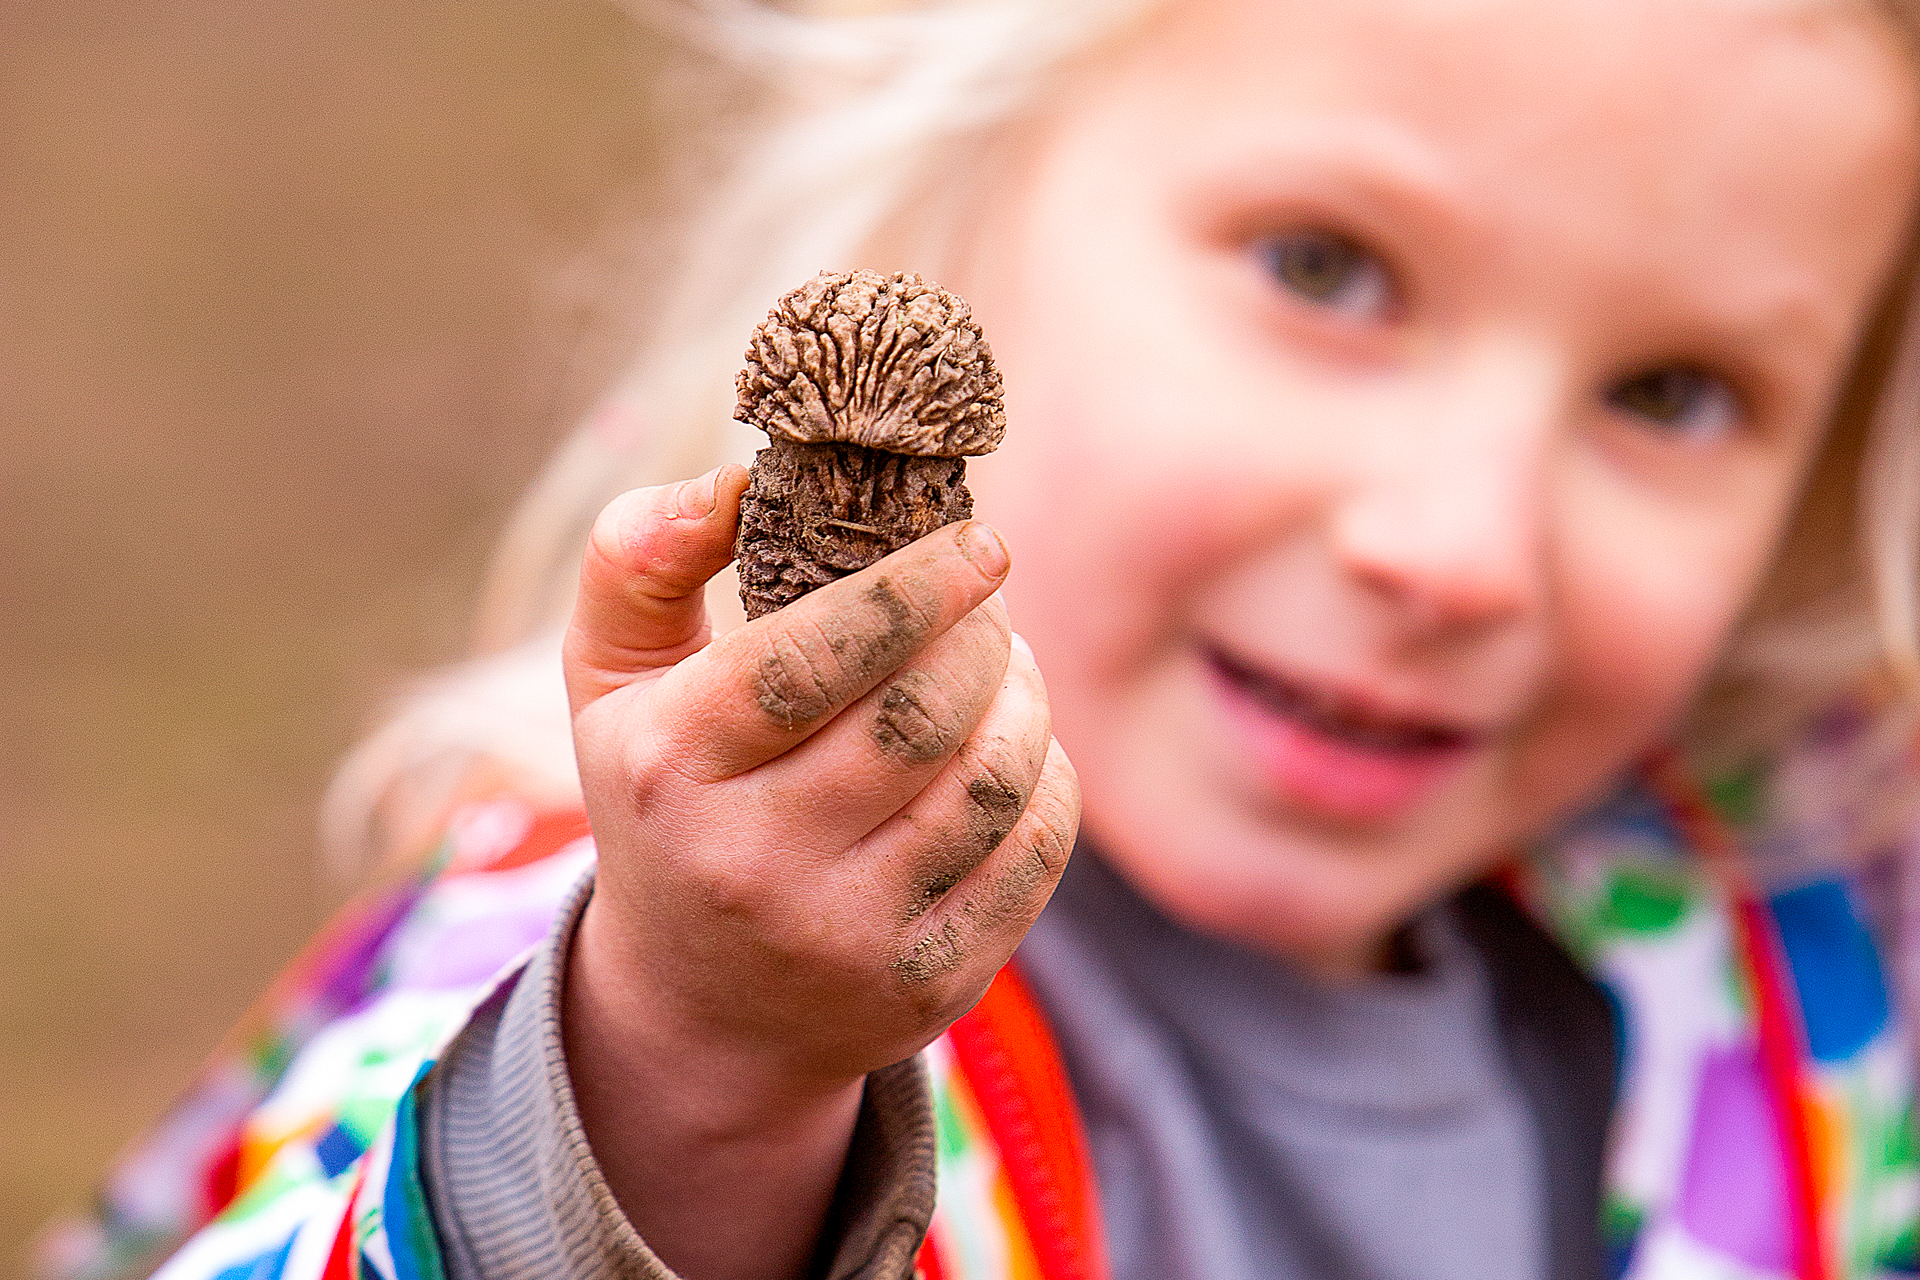 A preschool-age child holds up a woody mushroom she found to the camera, at Drumlin Farm Nature Preschool